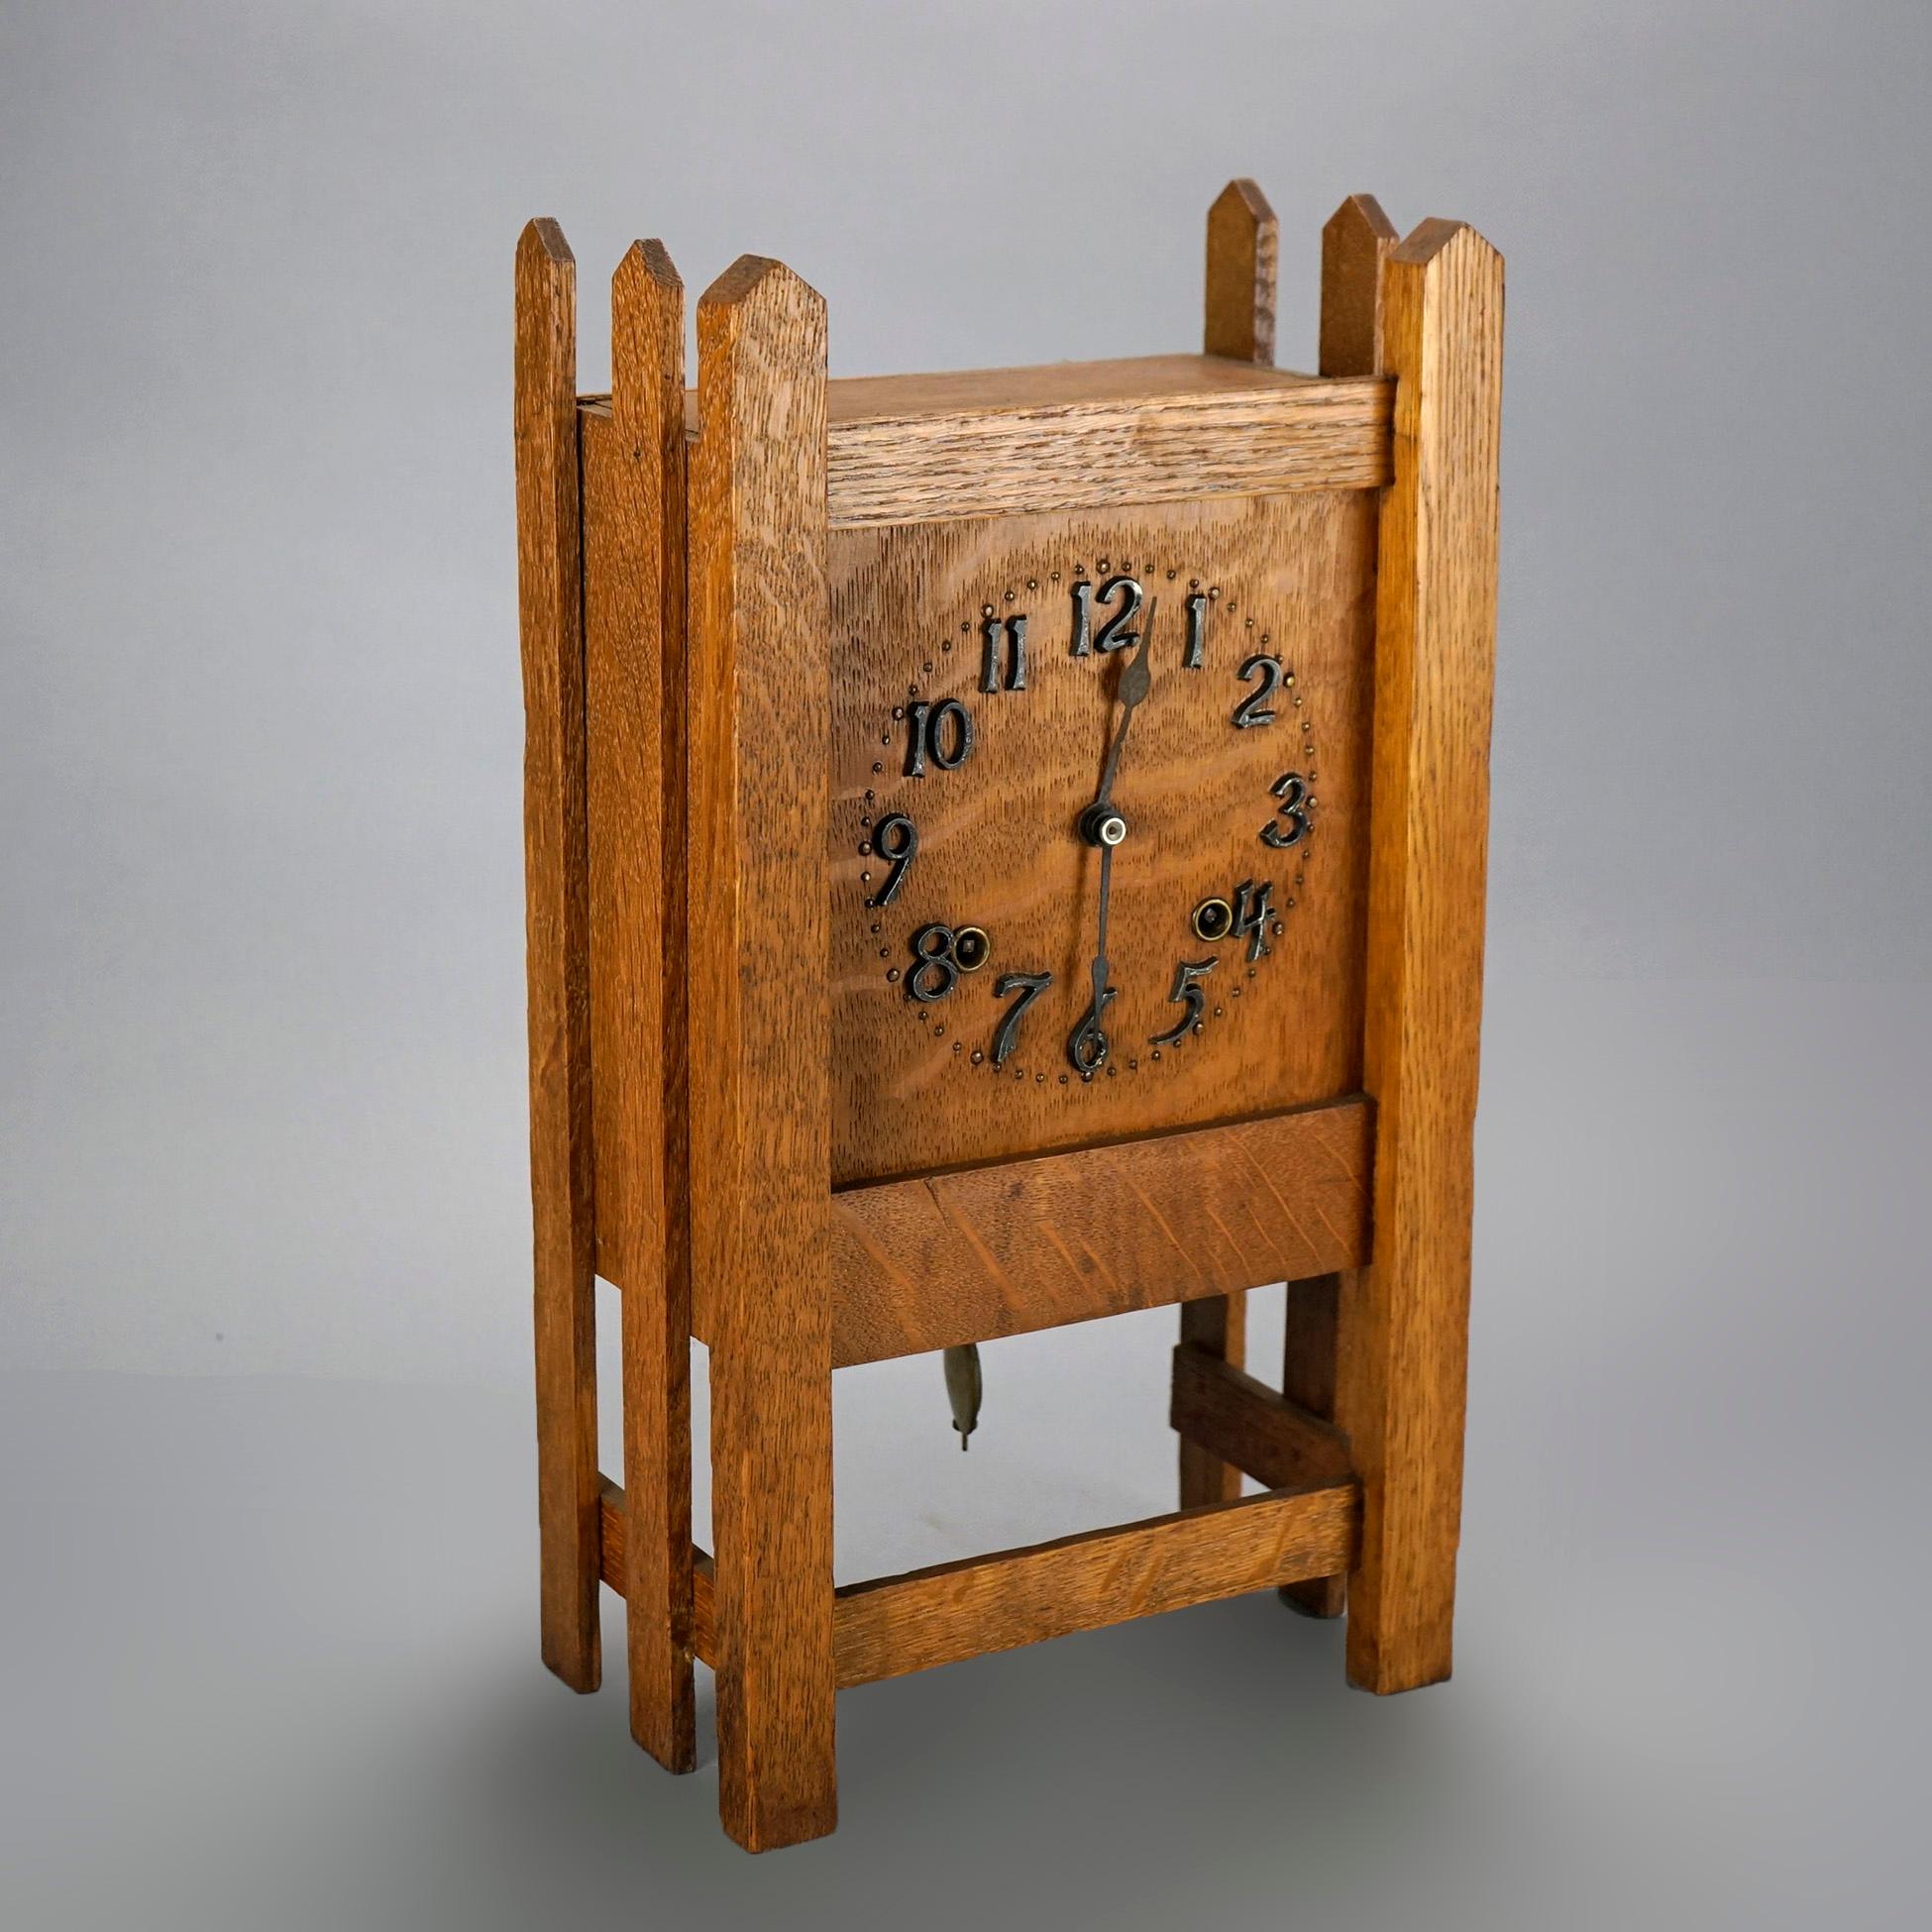 An antique Arts and Crafts Mission mantel clock offers quarter sawn oak construction with slat sides, c1910

Measures- 17.5''H x 9.5''W x 5.5''D

Catalogue Note: Ask about DISCOUNTED DELIVERY RATES available to most regions within 1,500 miles of New